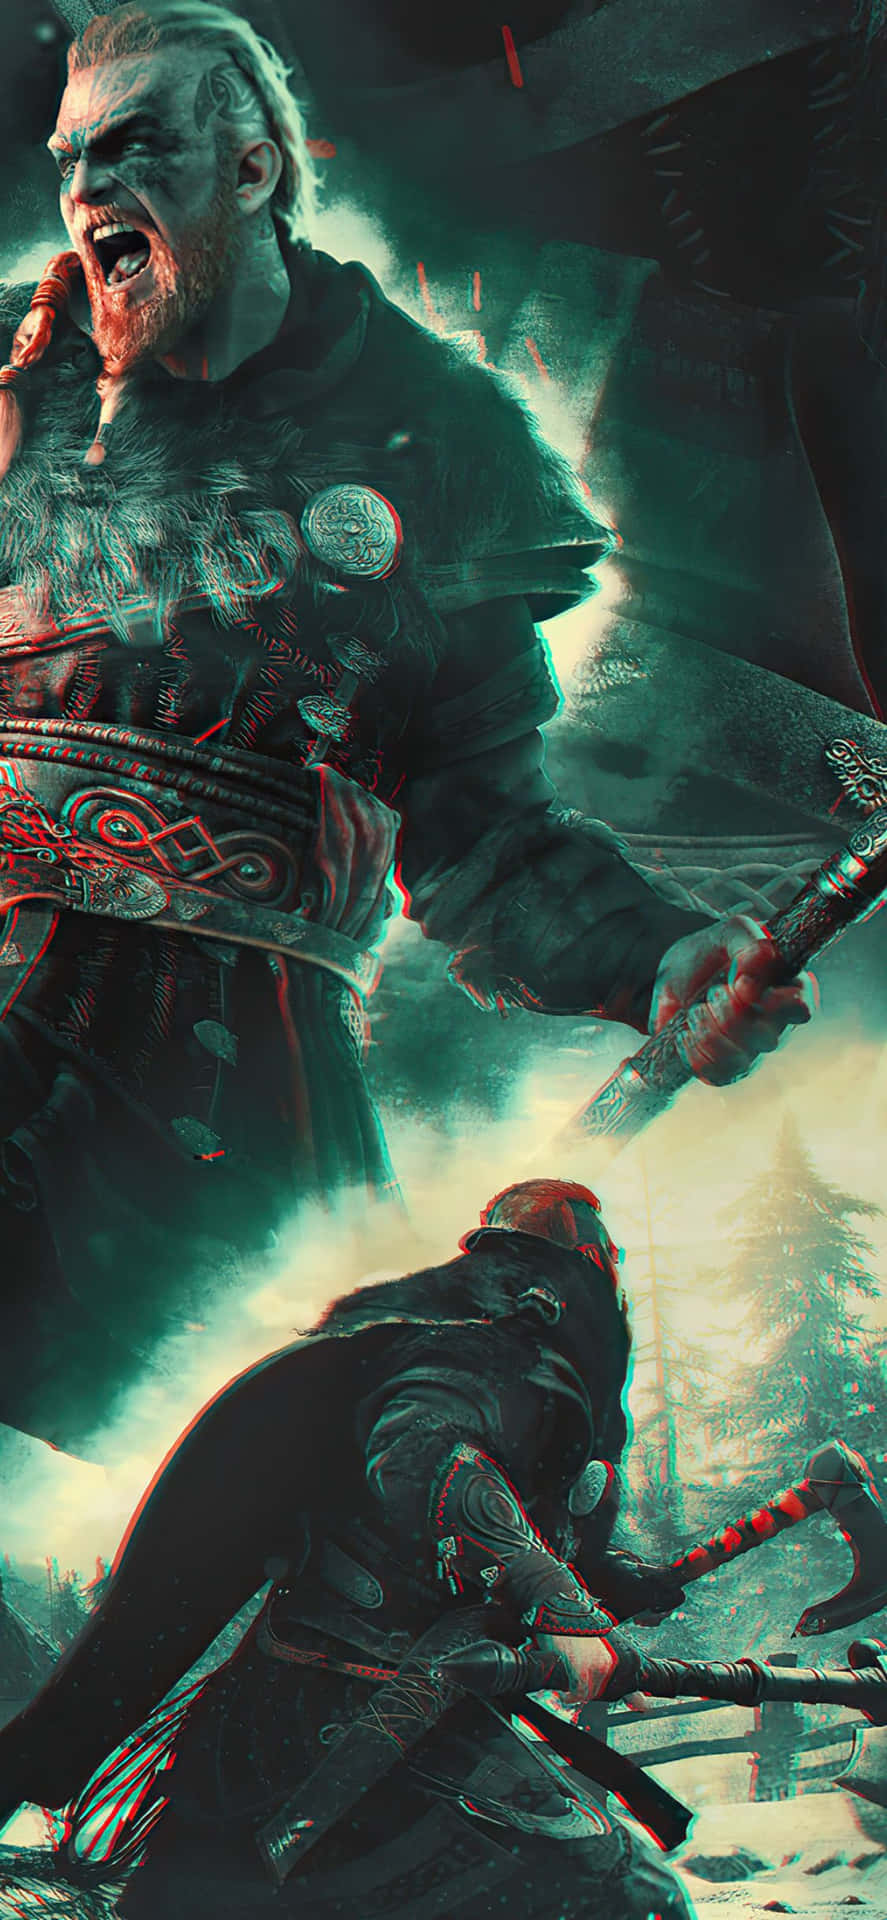 Iphone Xs Assassin's Creed Valhalla Eivor Going On A Rampage Background